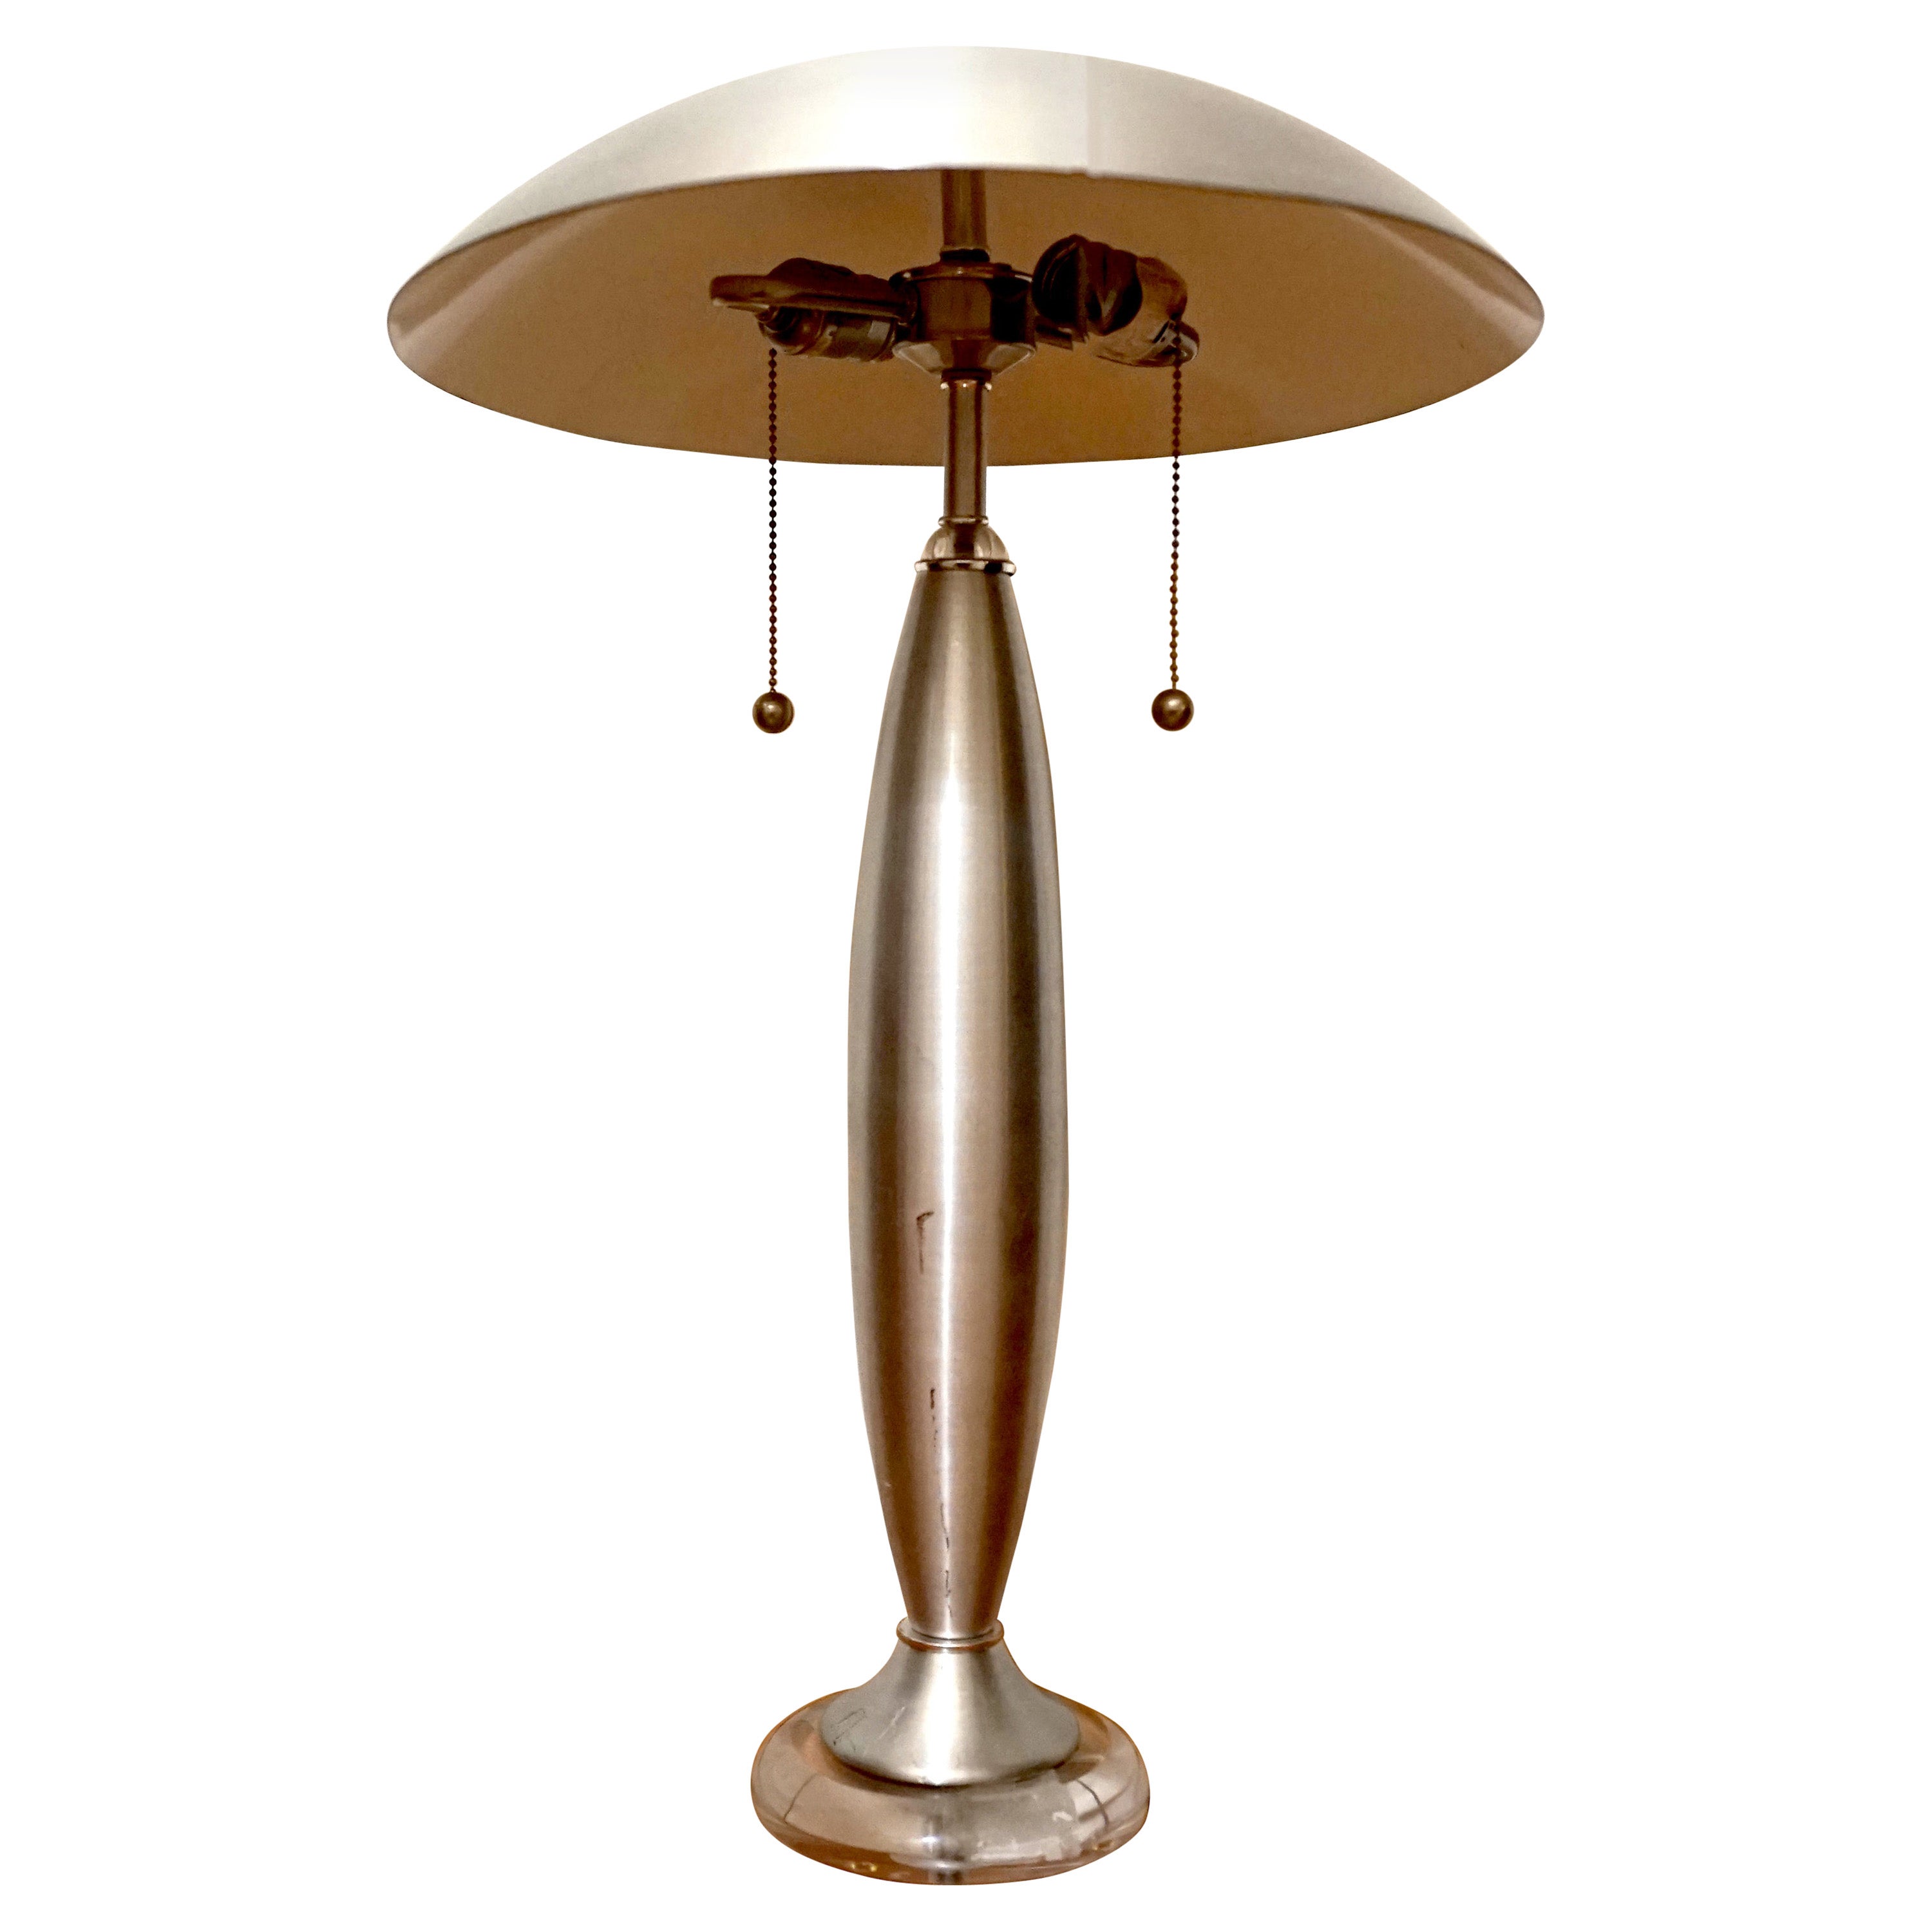 Vintage Domed Brushed Steel, Chrome Table Lamp in the Style of Laurel Lamp Co